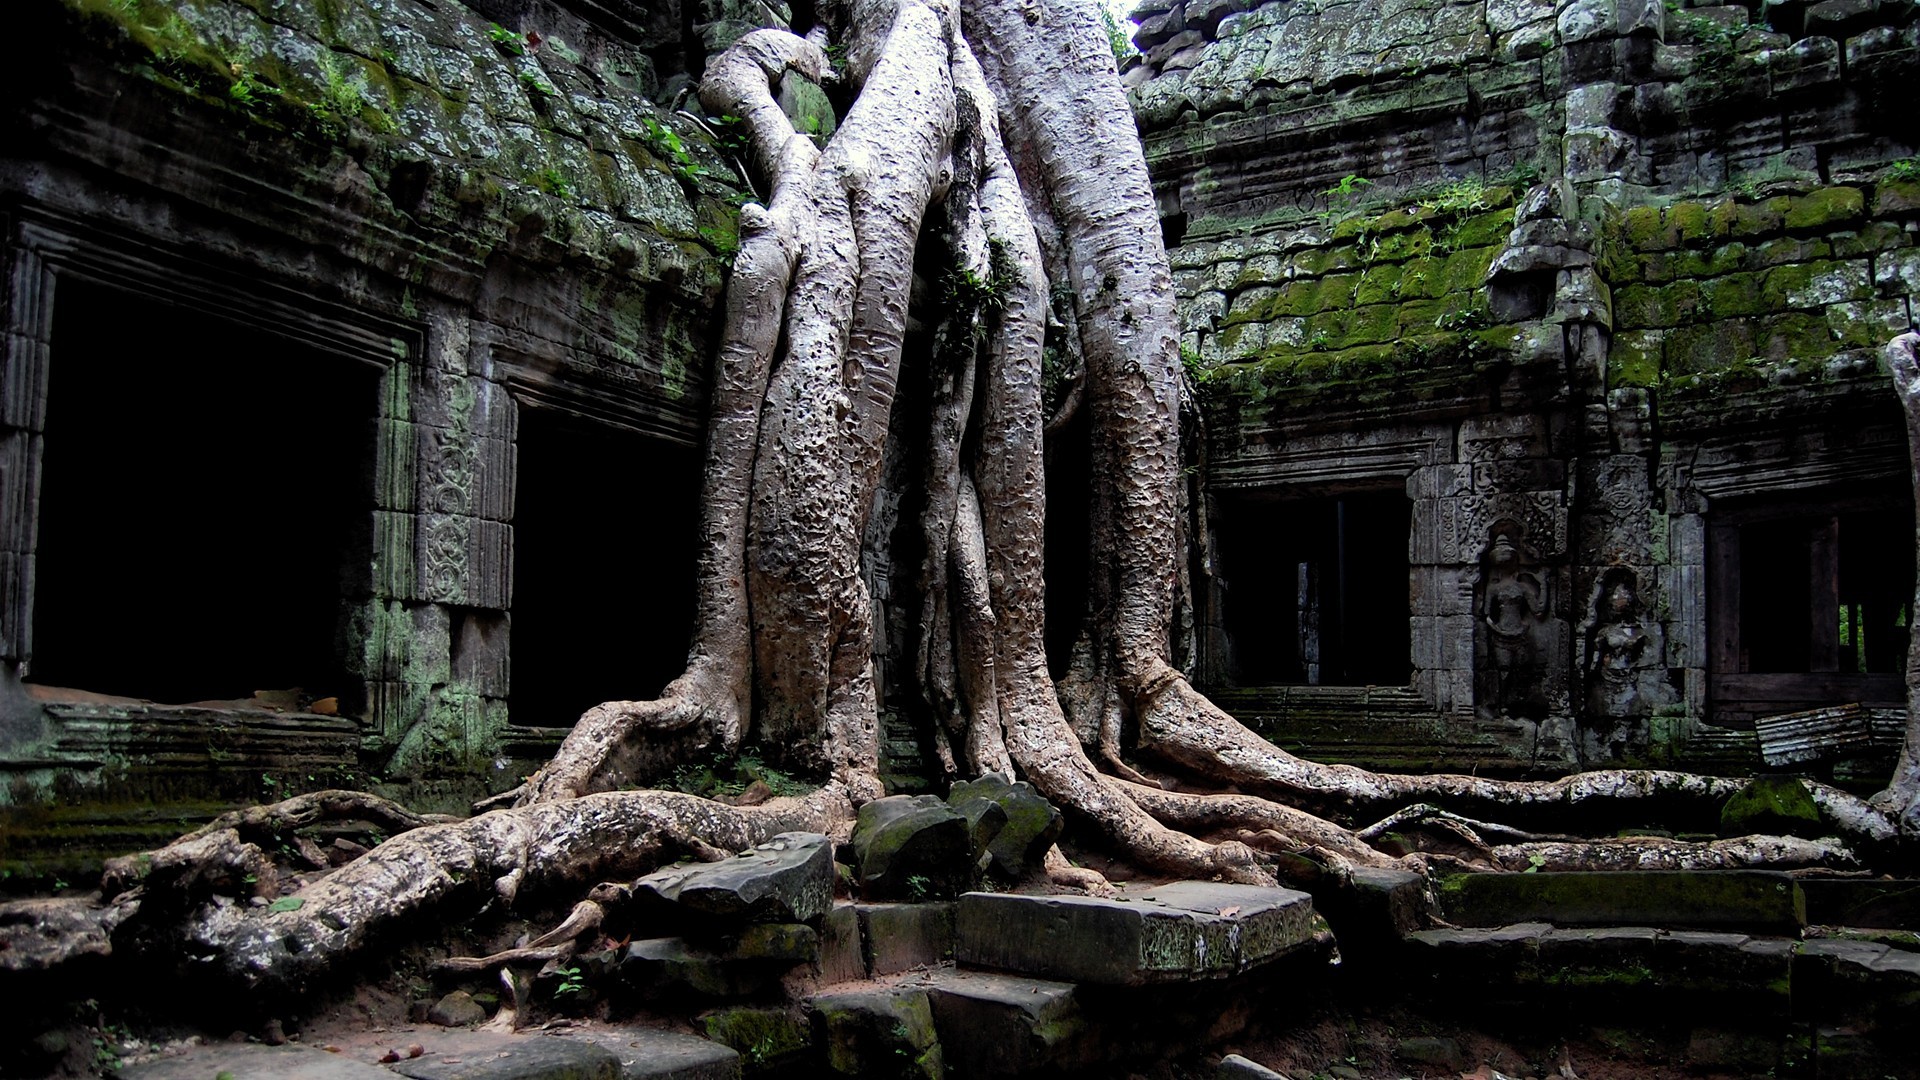 General 1920x1080 temple Angkor Wat monastery abandoned ruins Cambodia nature roots stones trees plants old